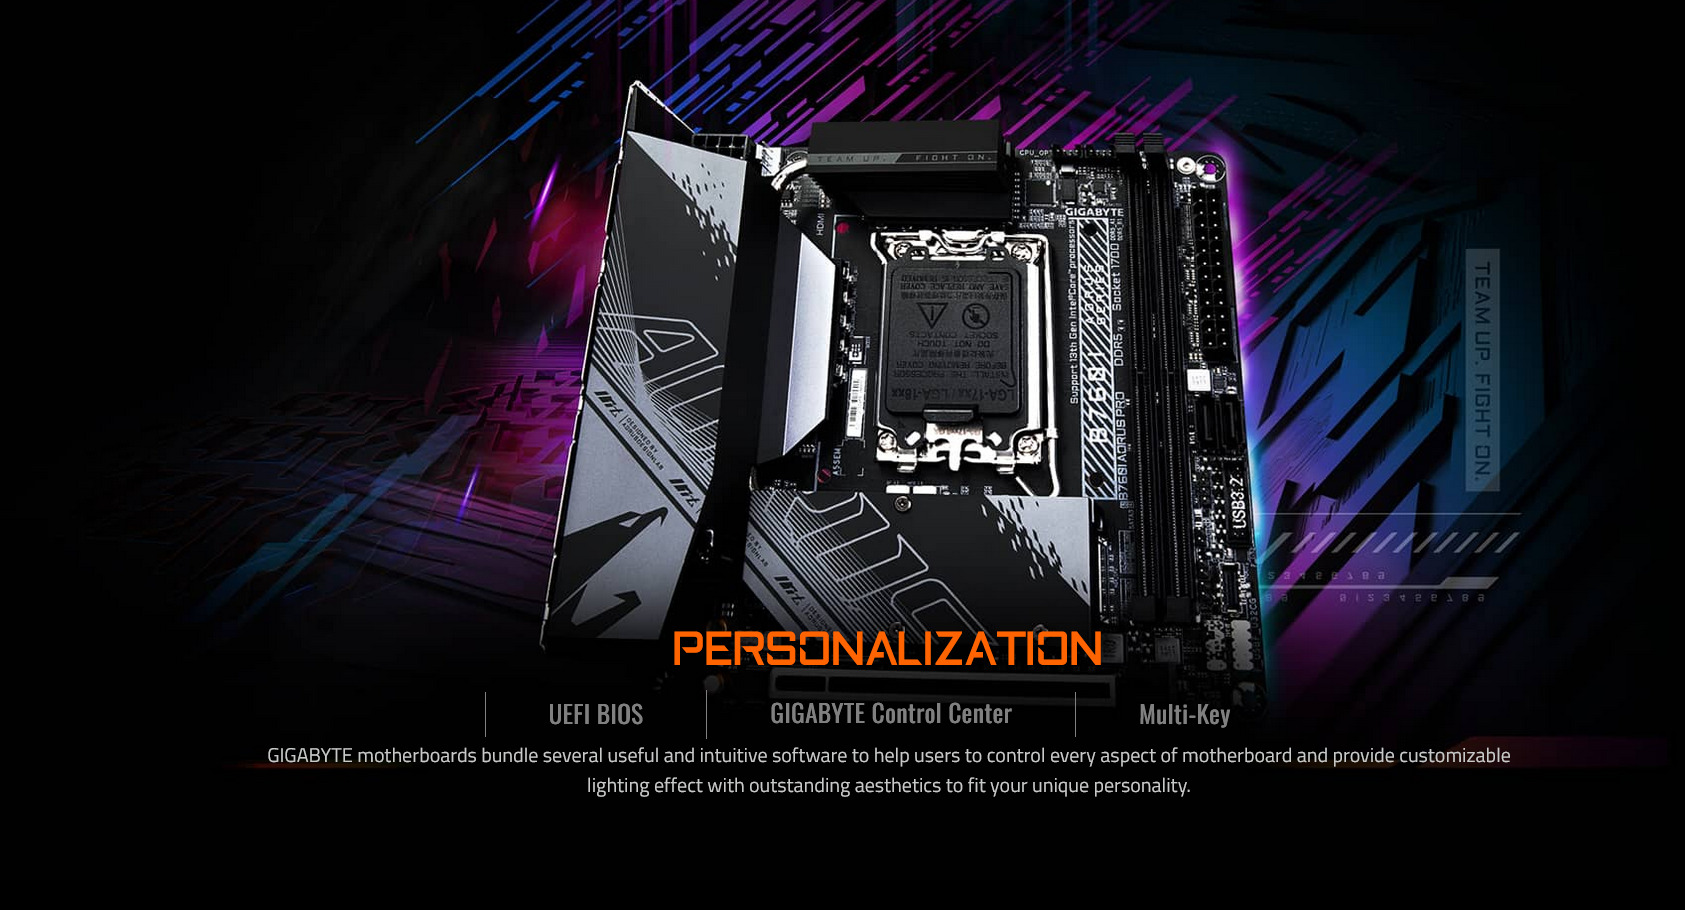 A large marketing image providing additional information about the product Gigabyte B760I Aorus Pro LGA1700 mITX Desktop Motherboard - Additional alt info not provided